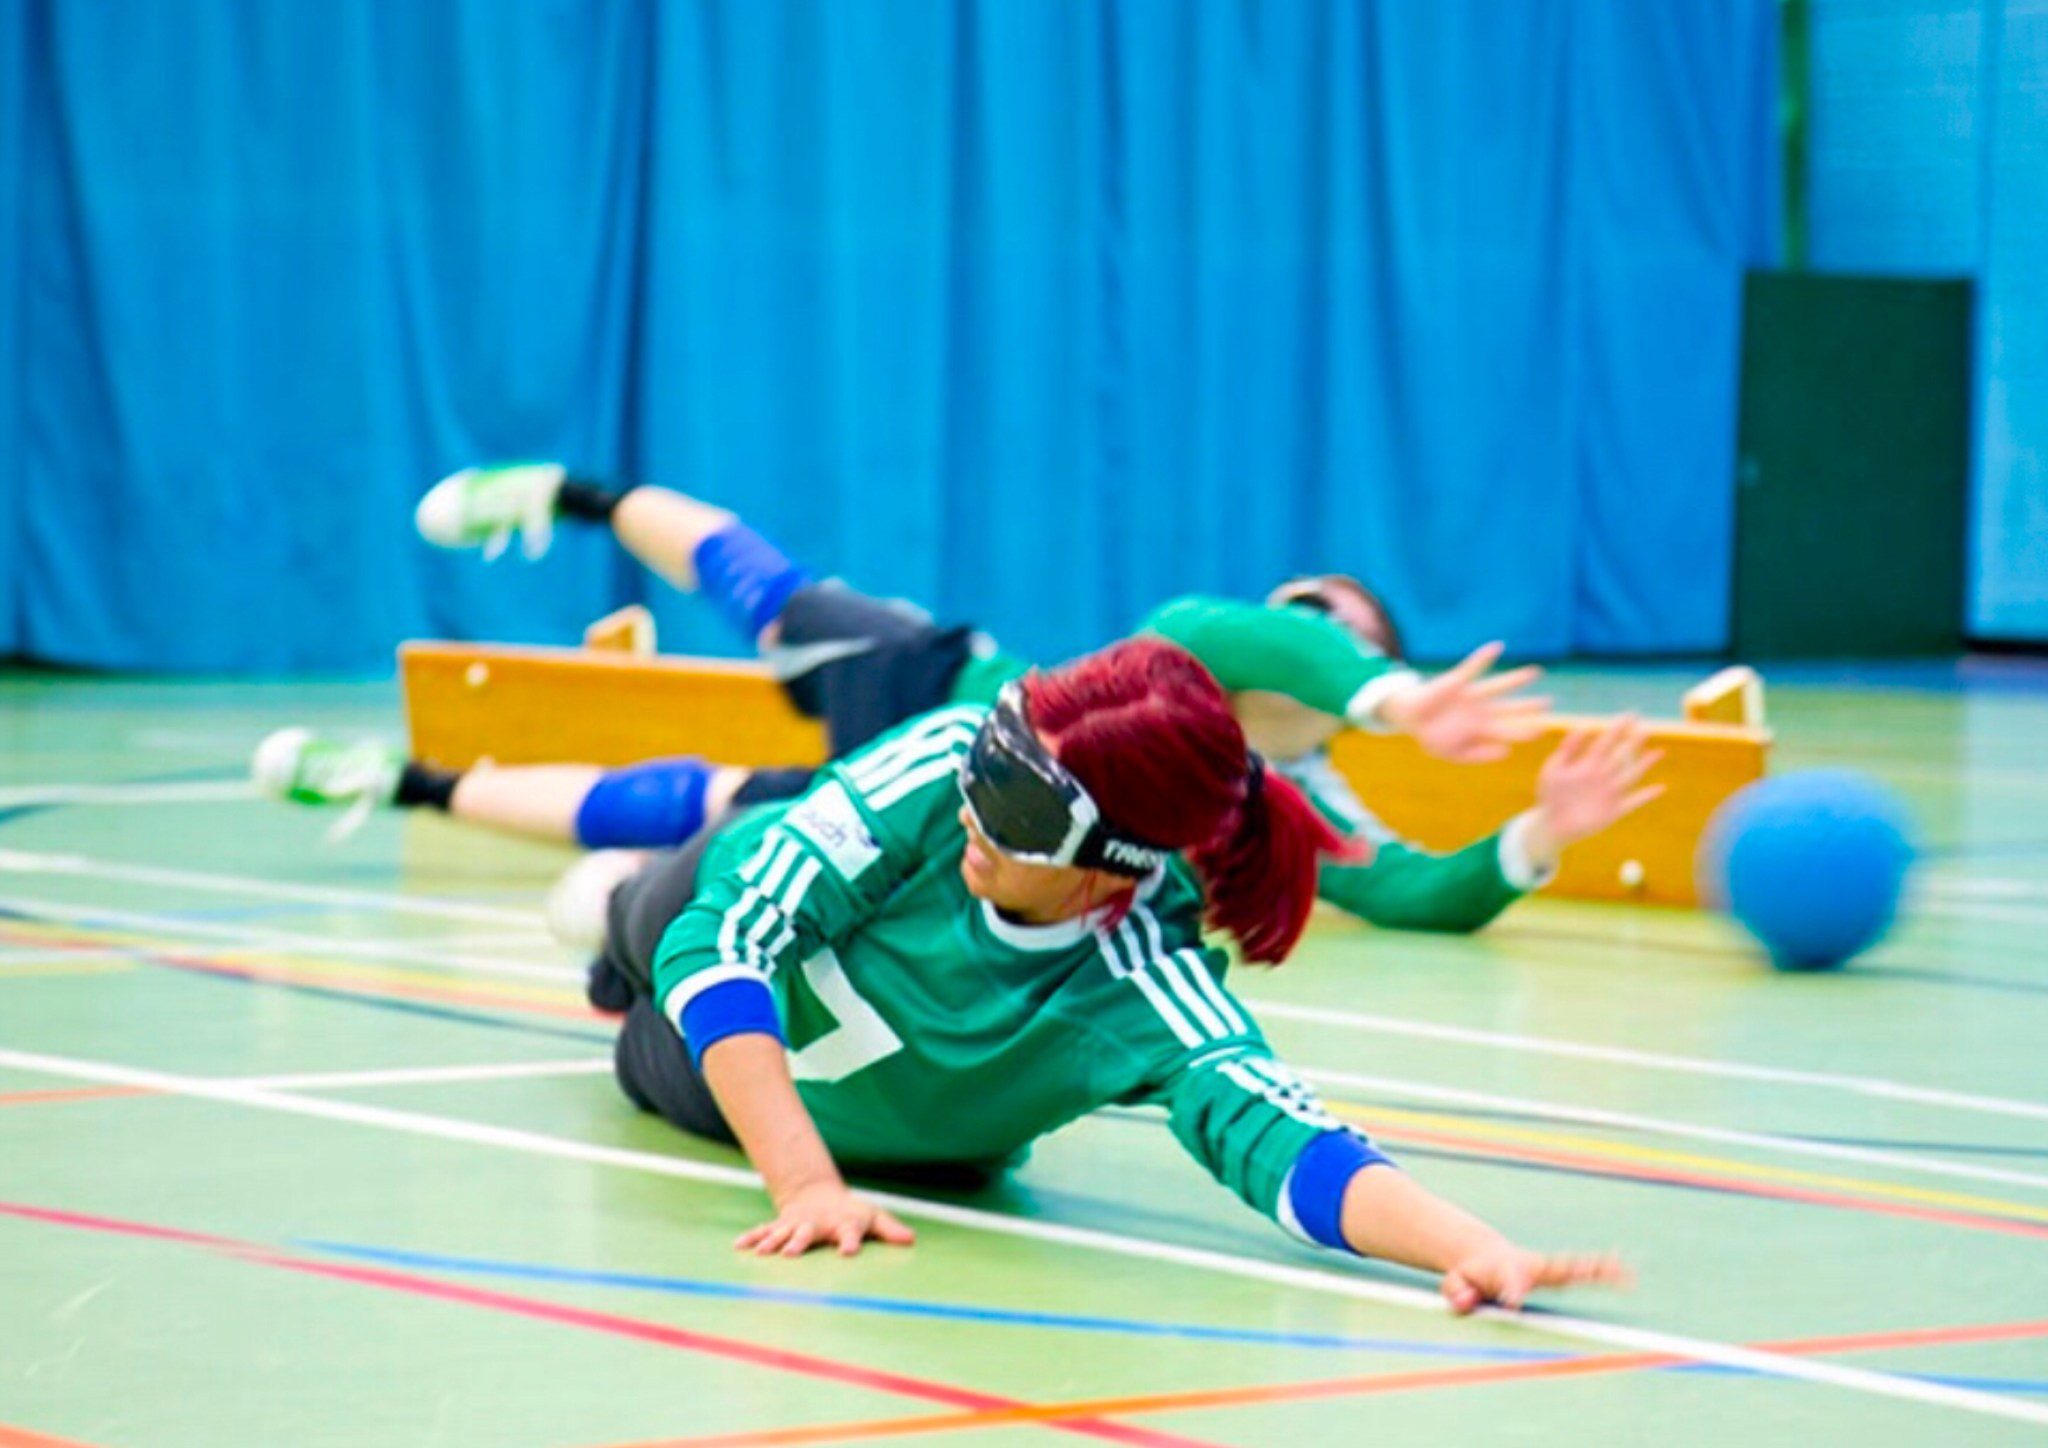 A woman laying on the floor of a Goal-ball court reaching for the ball. There is a man reaching for the ball behind her.